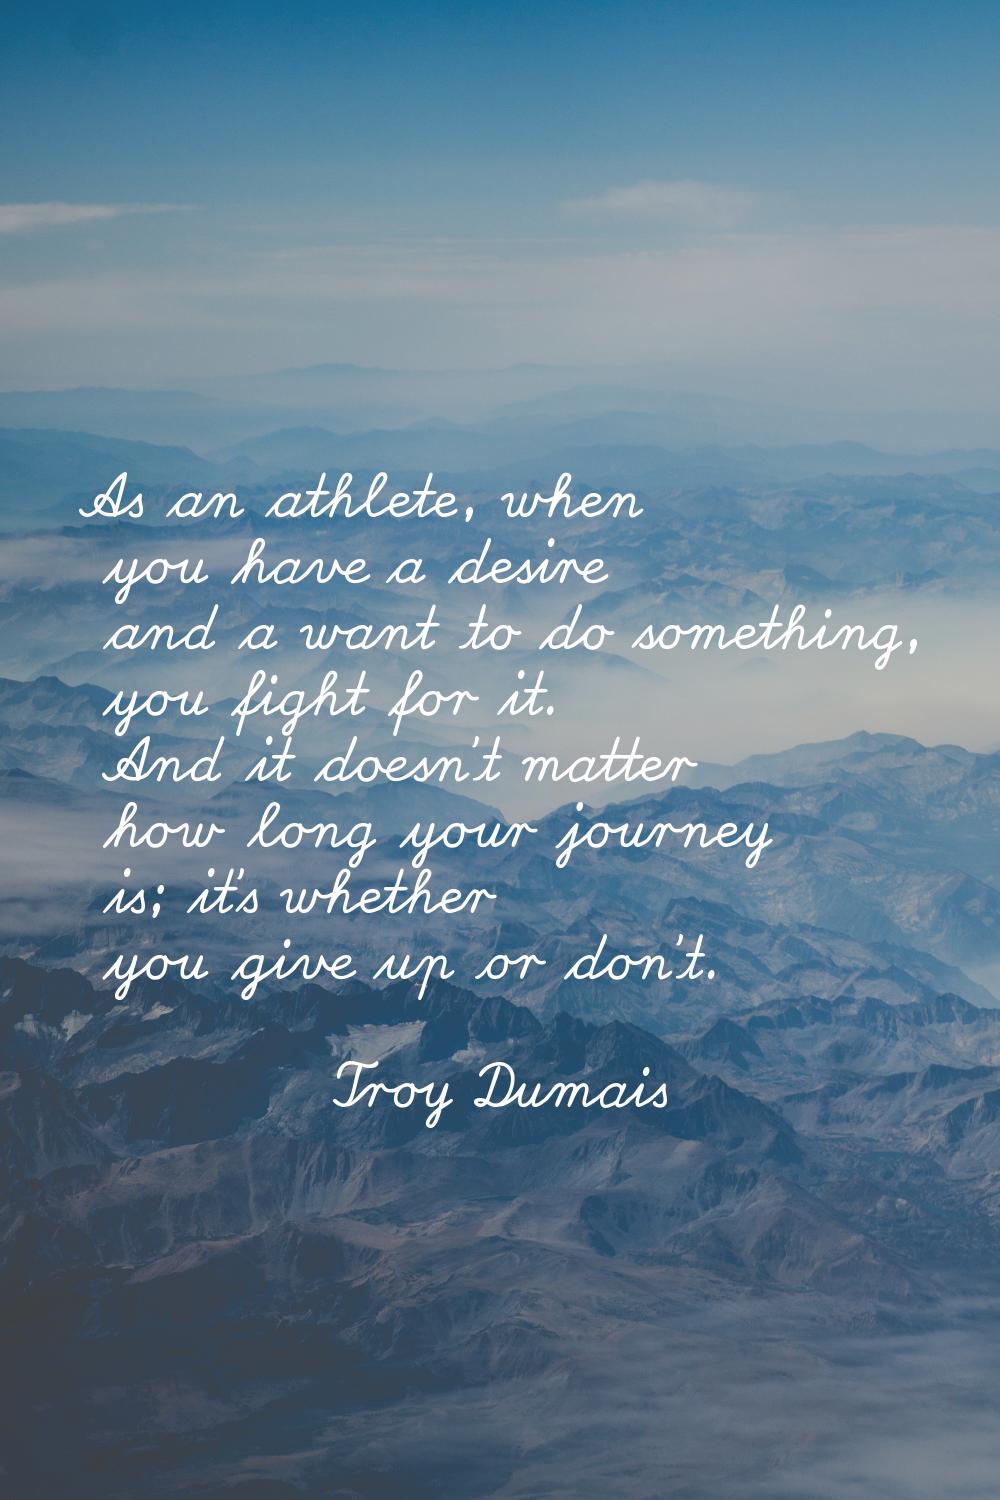 As an athlete, when you have a desire and a want to do something, you fight for it. And it doesn't 